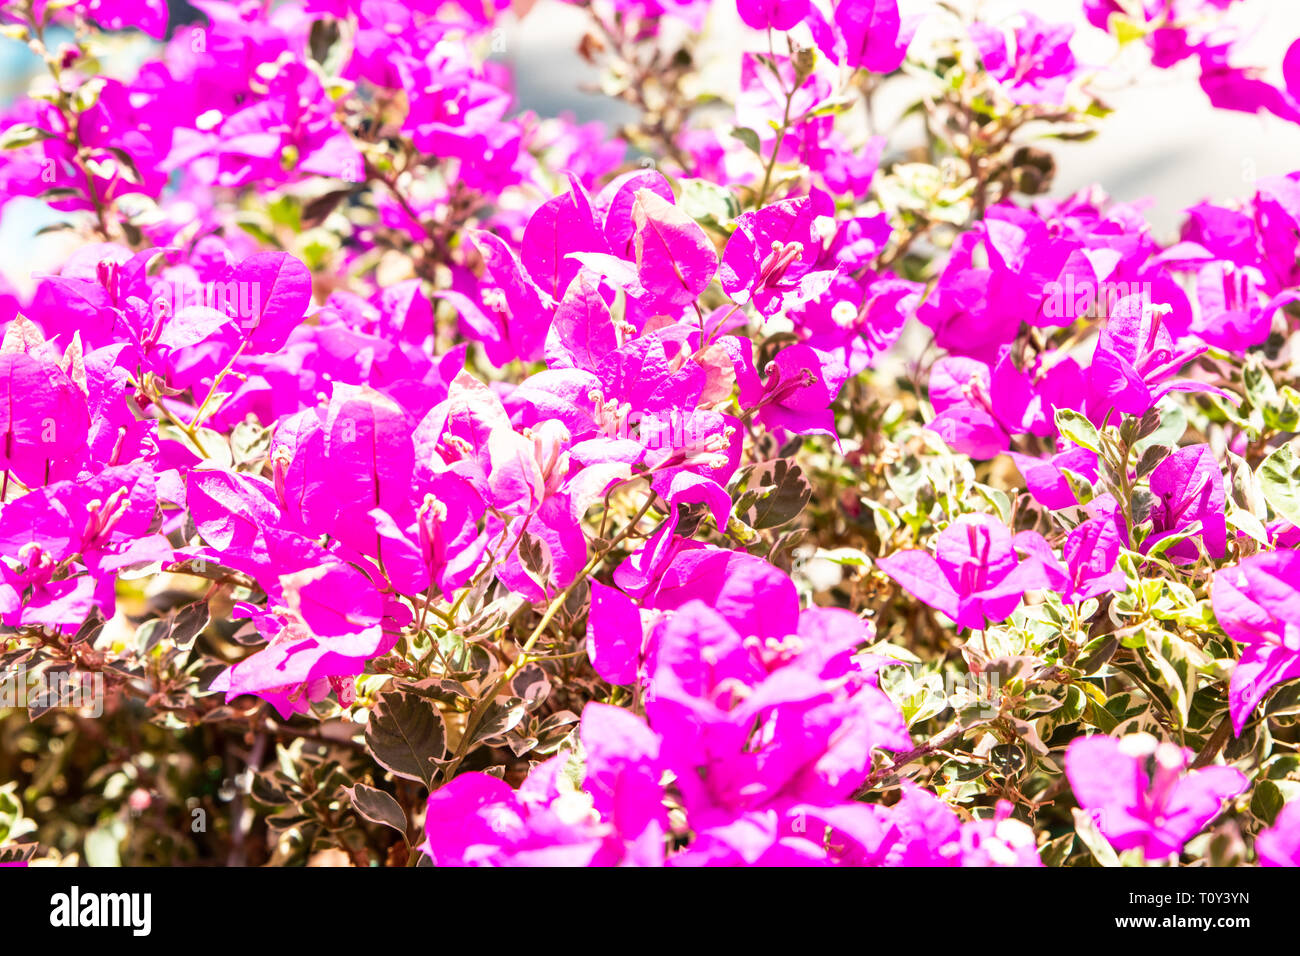 Tiny pink bush flowers in bloom. Closeup of tiny pink flowers in bloom. Stock Photo